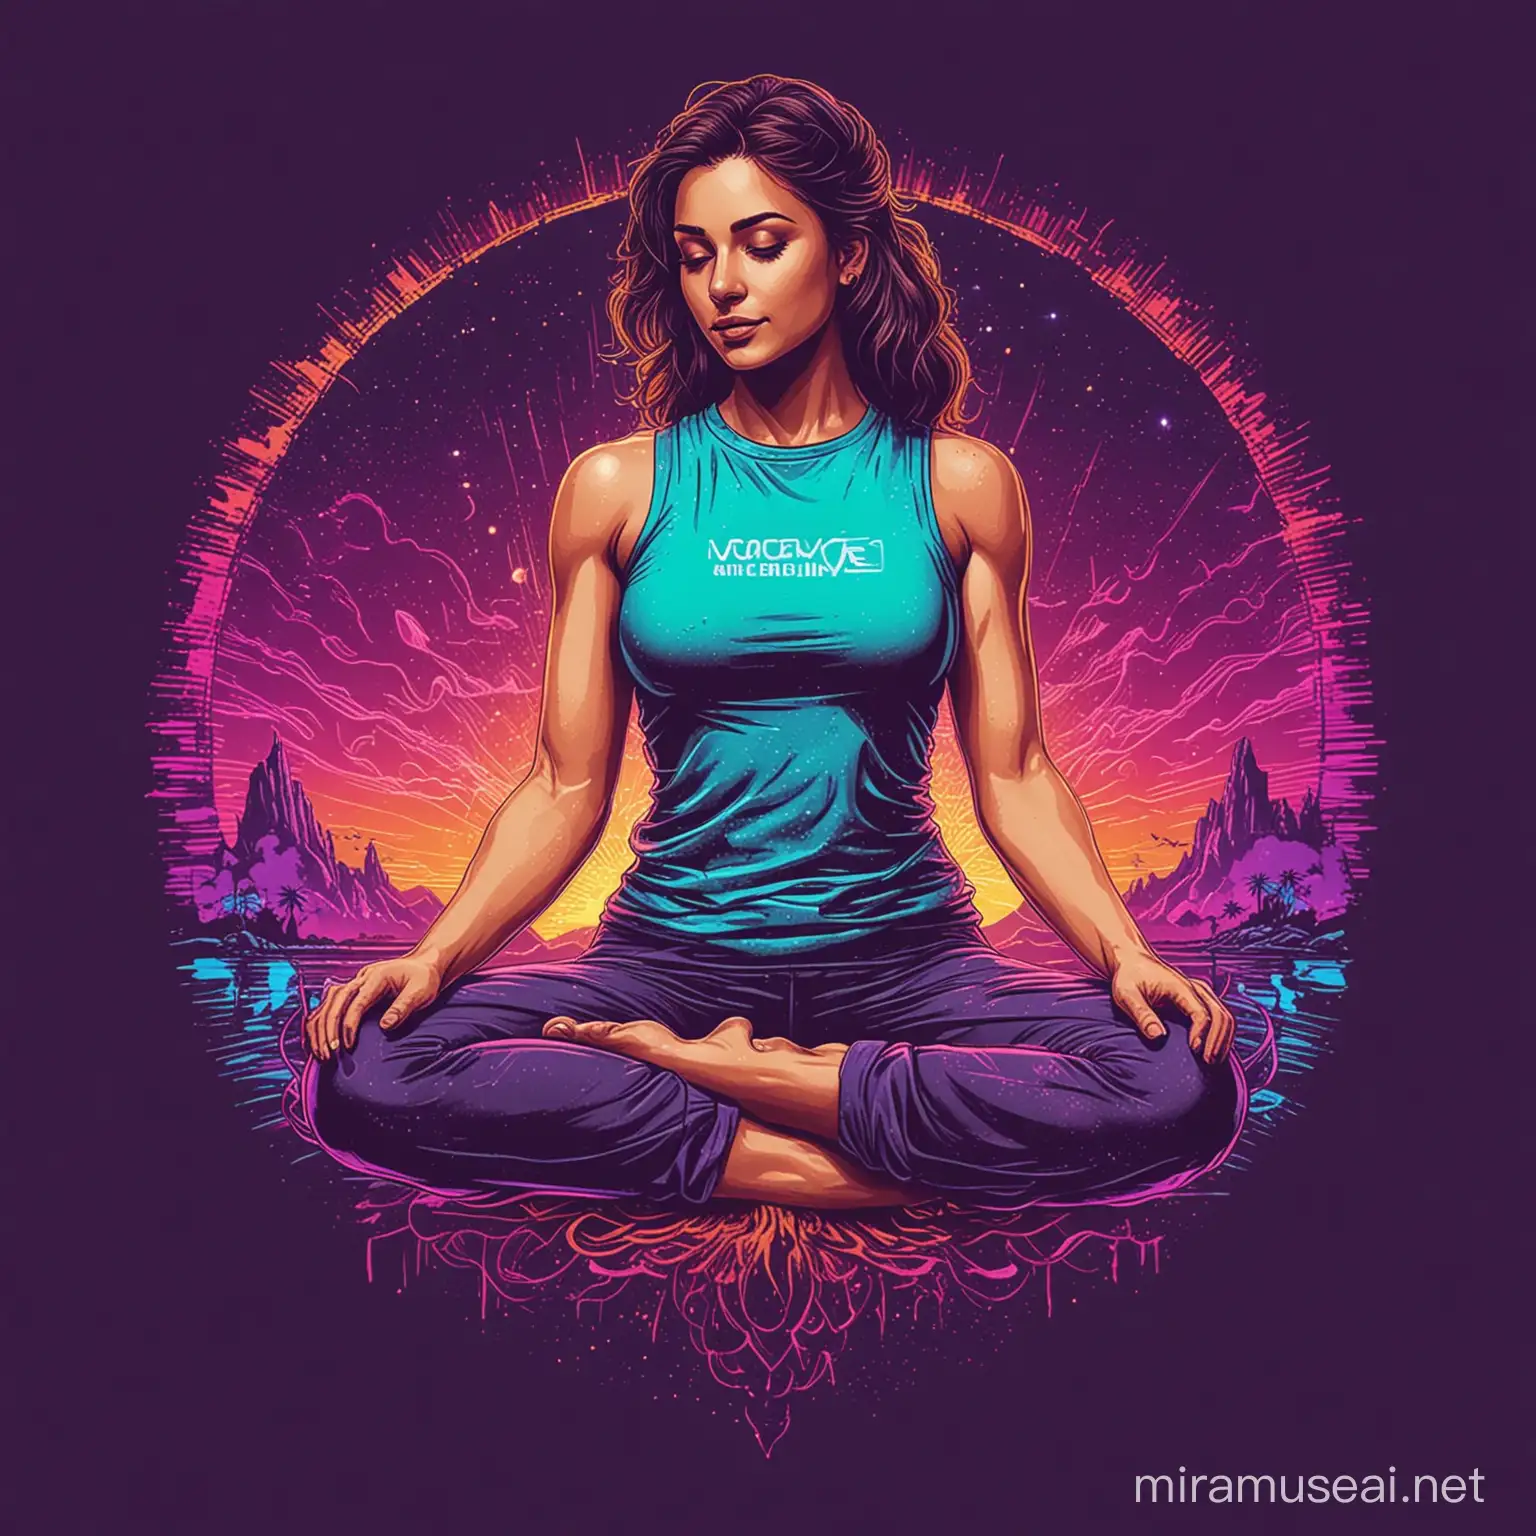 Synthwave Yoga TShirt Design with Vivid Colors and Technical Background